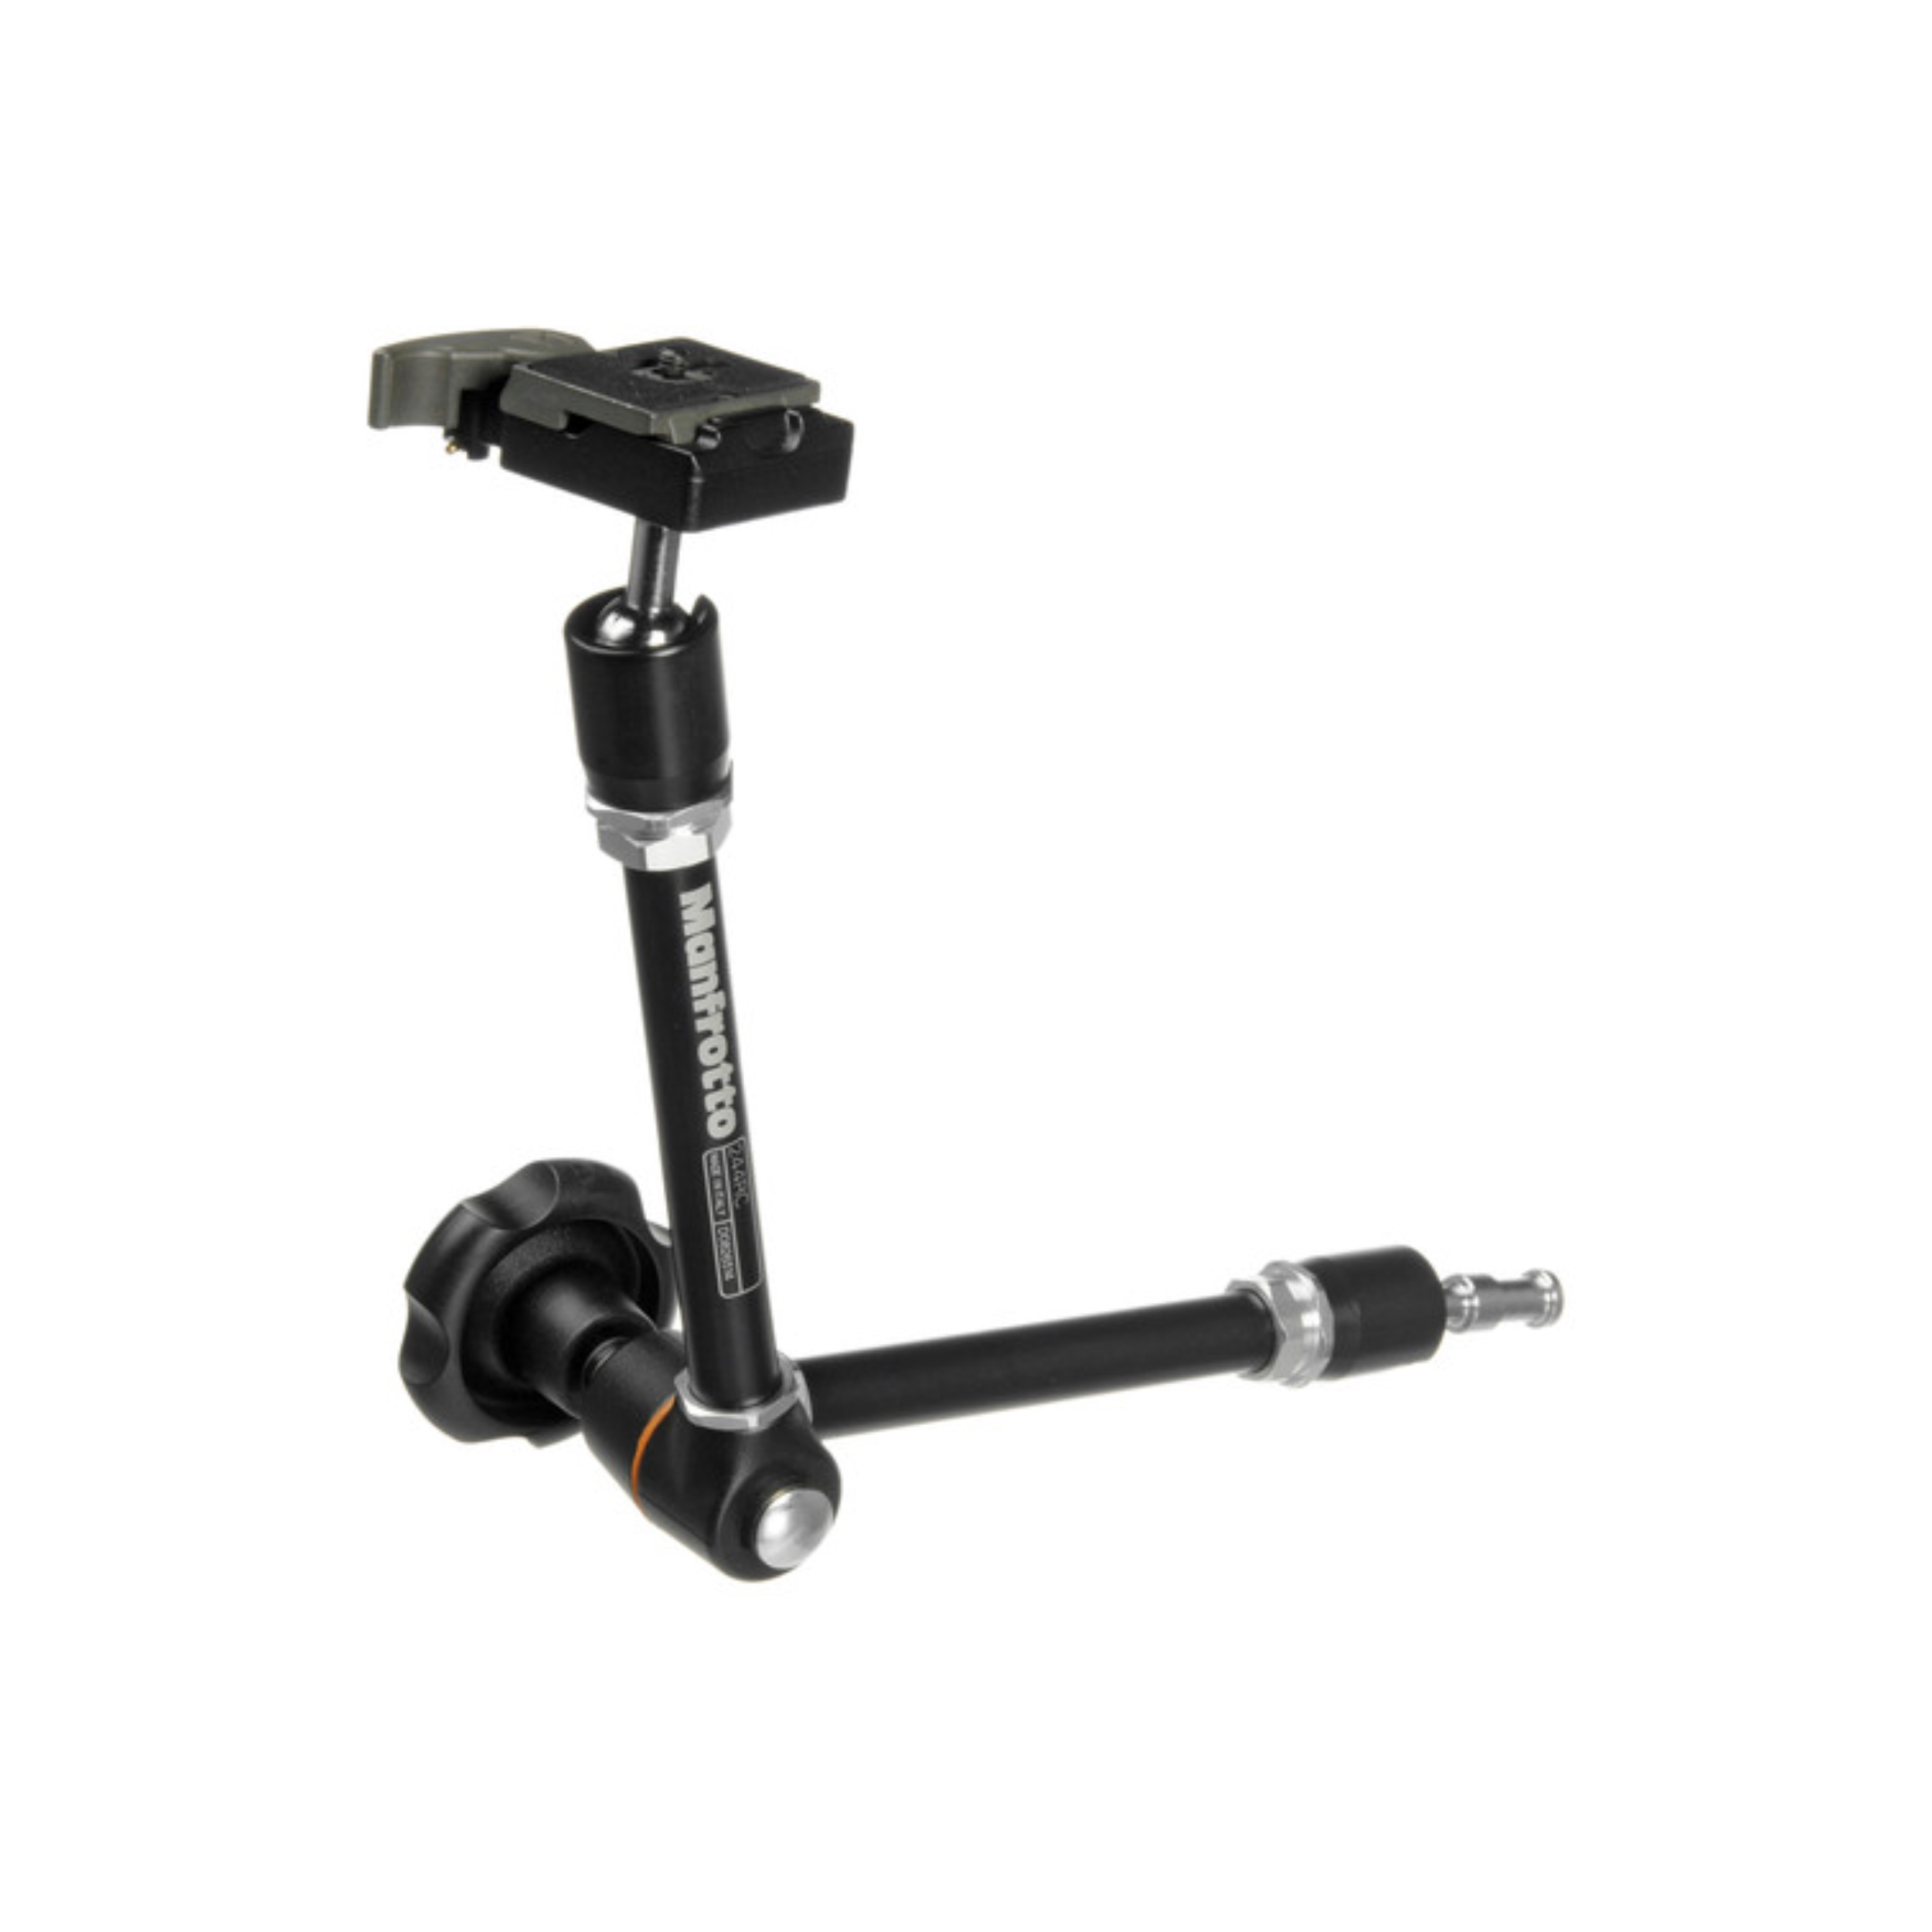 Manfrotto 244RC Variable Friction Magic Arm with Quick Release Camera Bracket